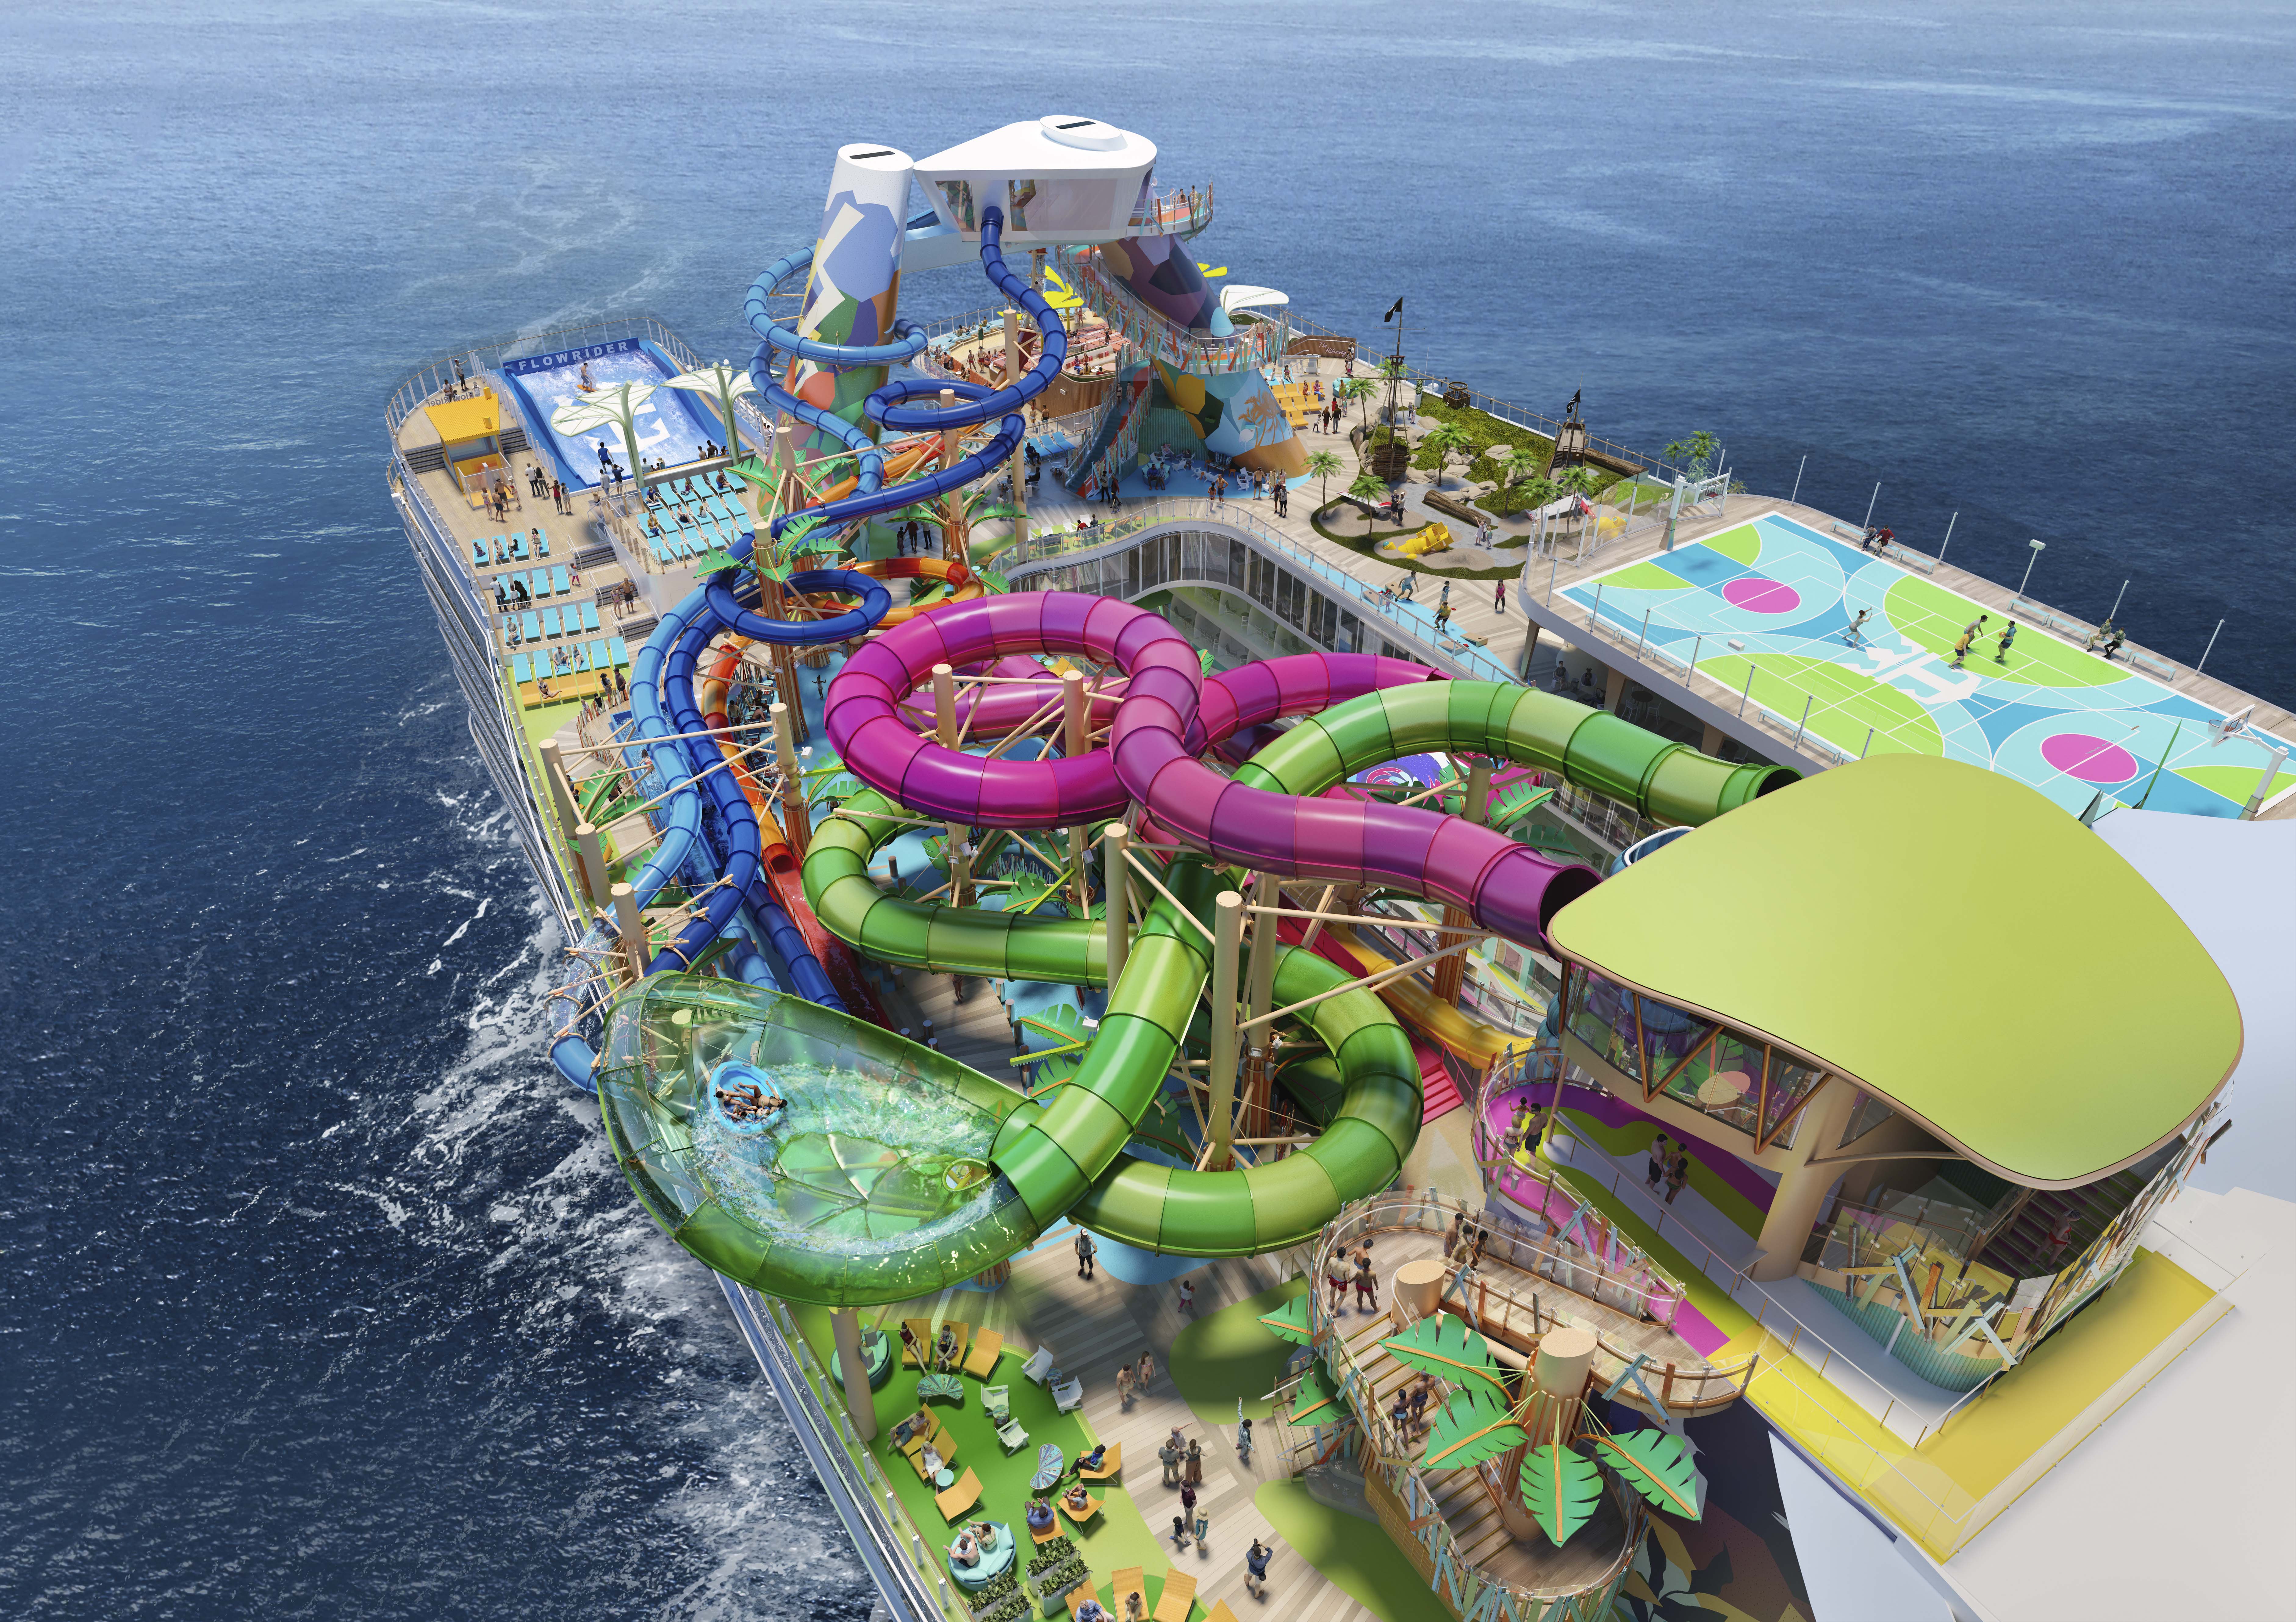 INTRODUCING THE ICON OF VACATIONS: ROYAL CARIBBEAN REVEALS ICON OF THE SEAS | Royal Caribbean Press Center